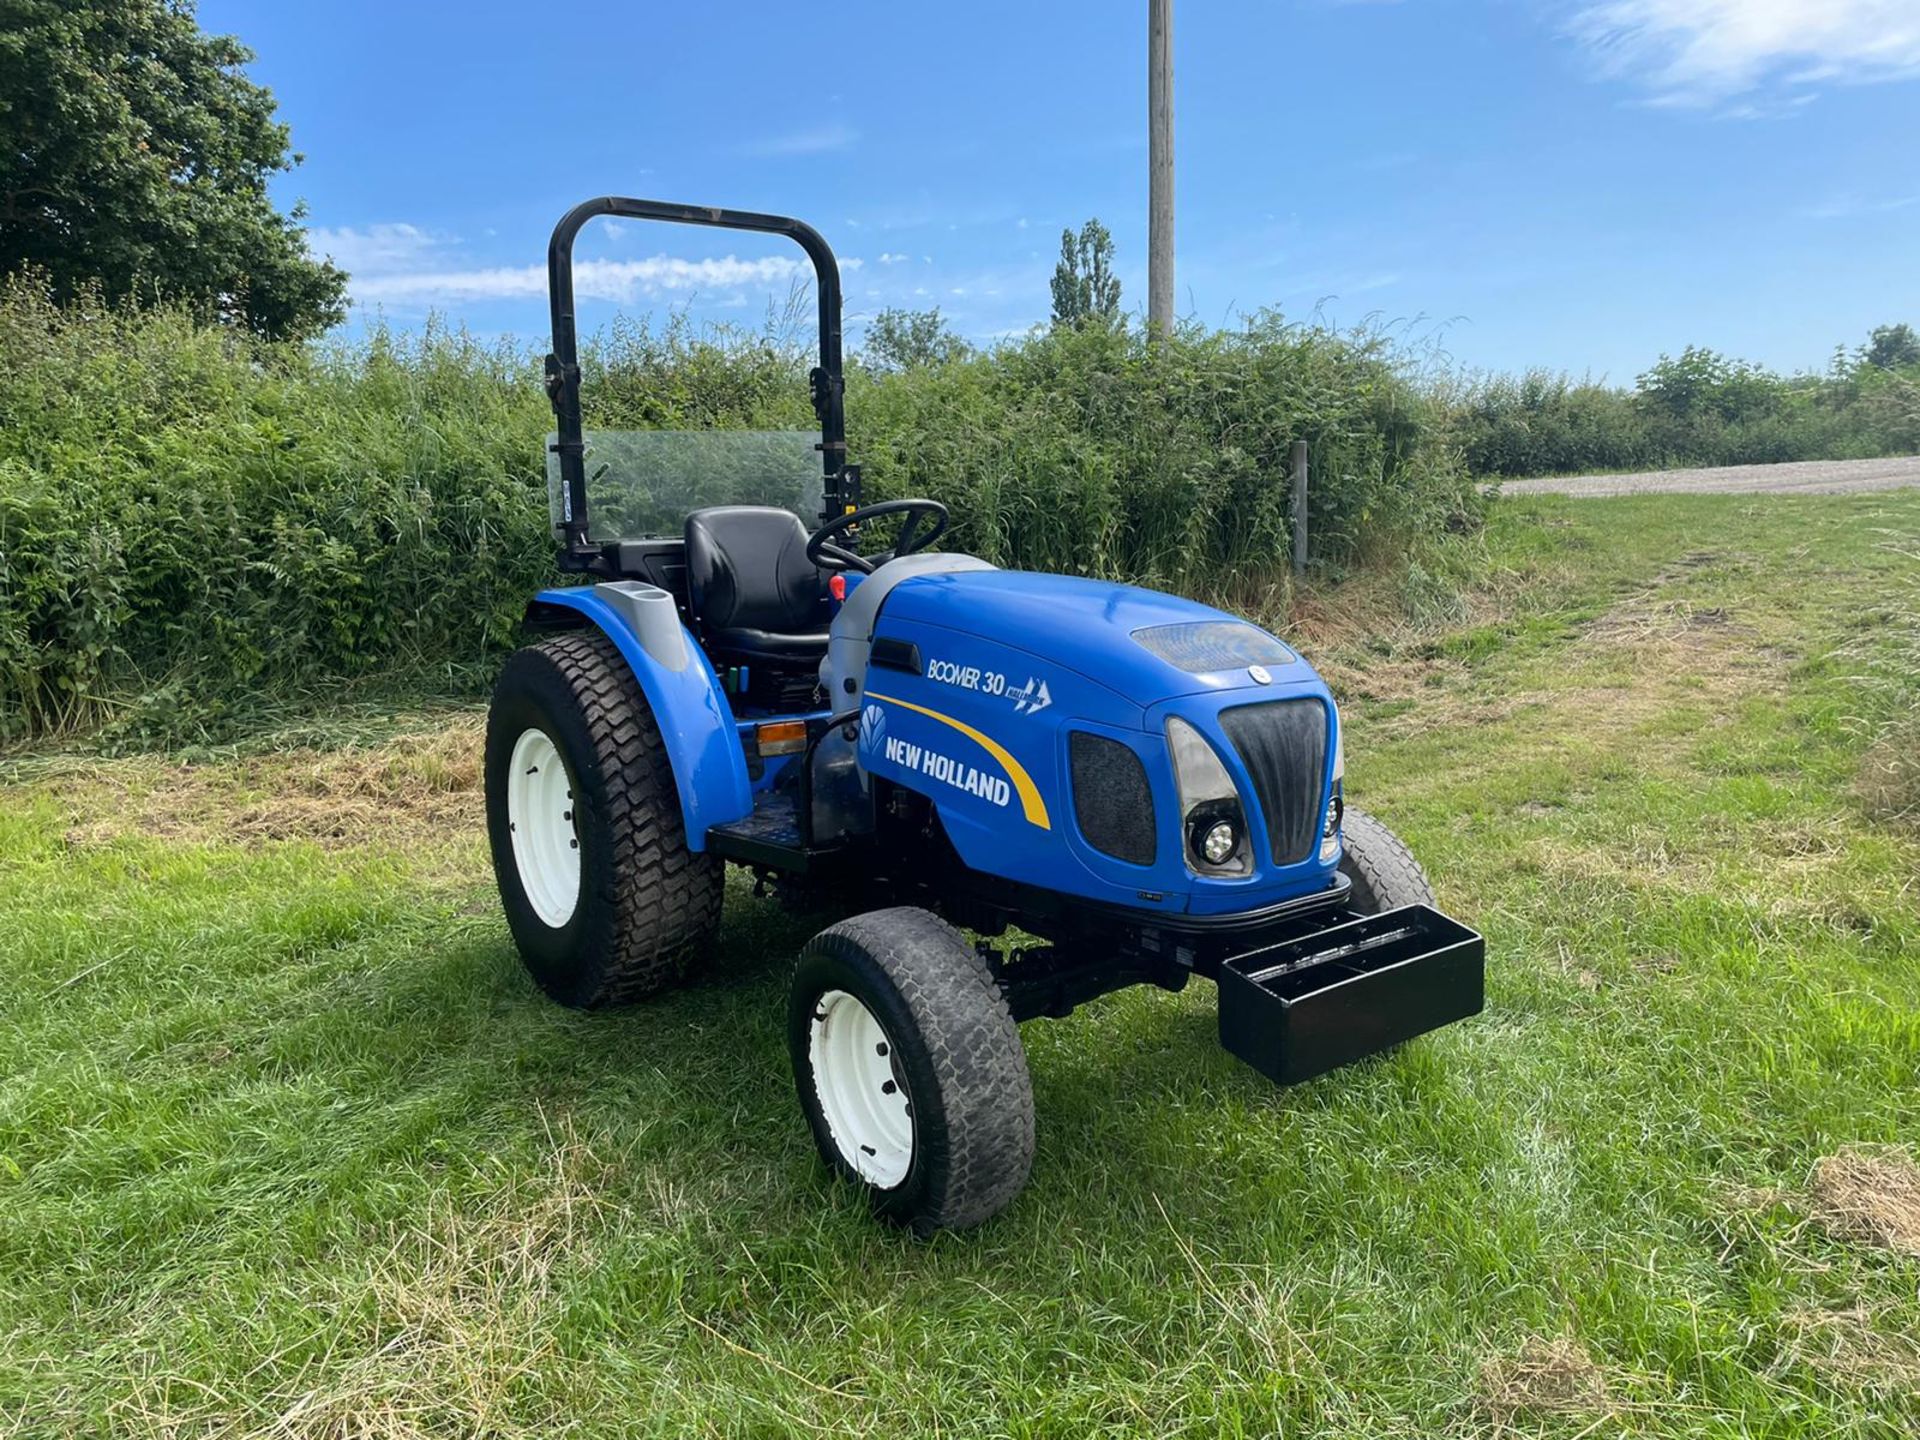 2018 NEW HOLLAND BOOMER 30 COMPACT TRACTOR, RUNS AND DRIVES, SHOWING A LOW 975 HOURS *PLUS VAT* - Image 2 of 9